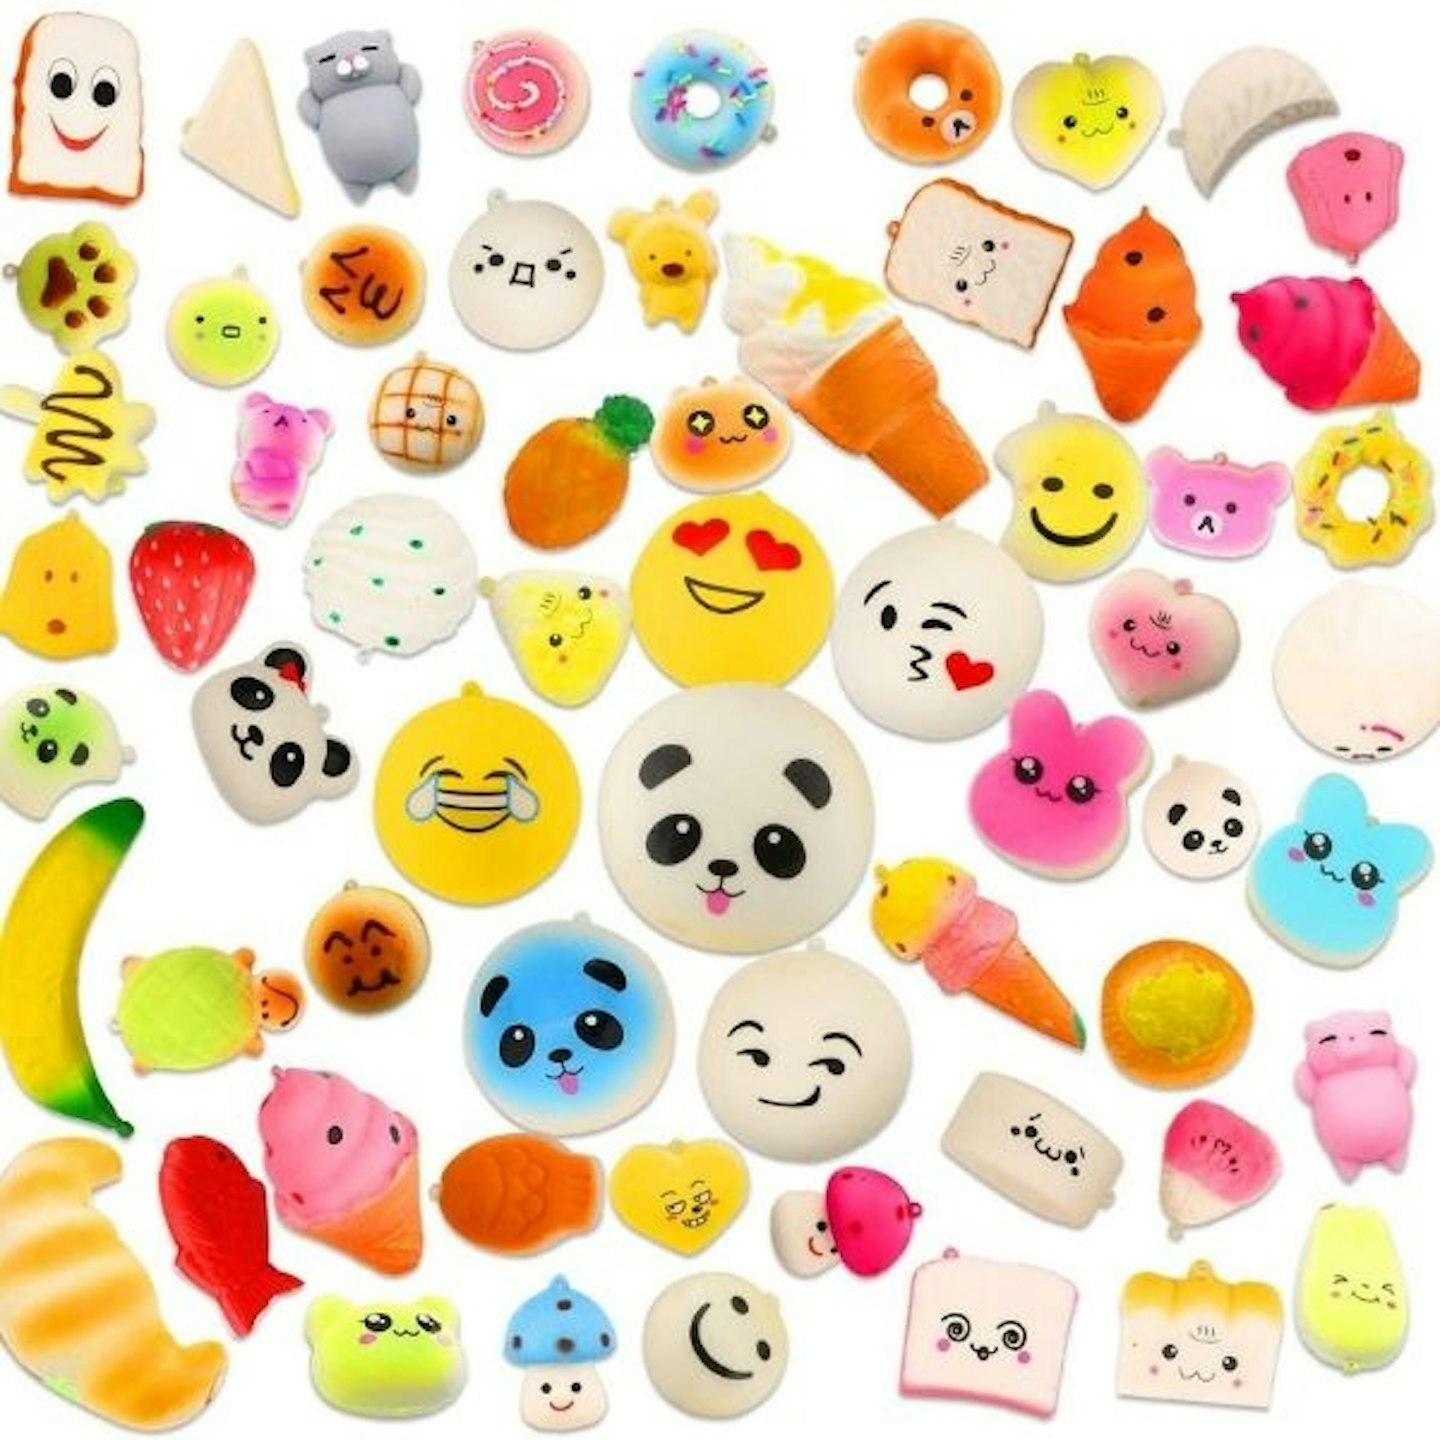 Acelife Squishy Toys 